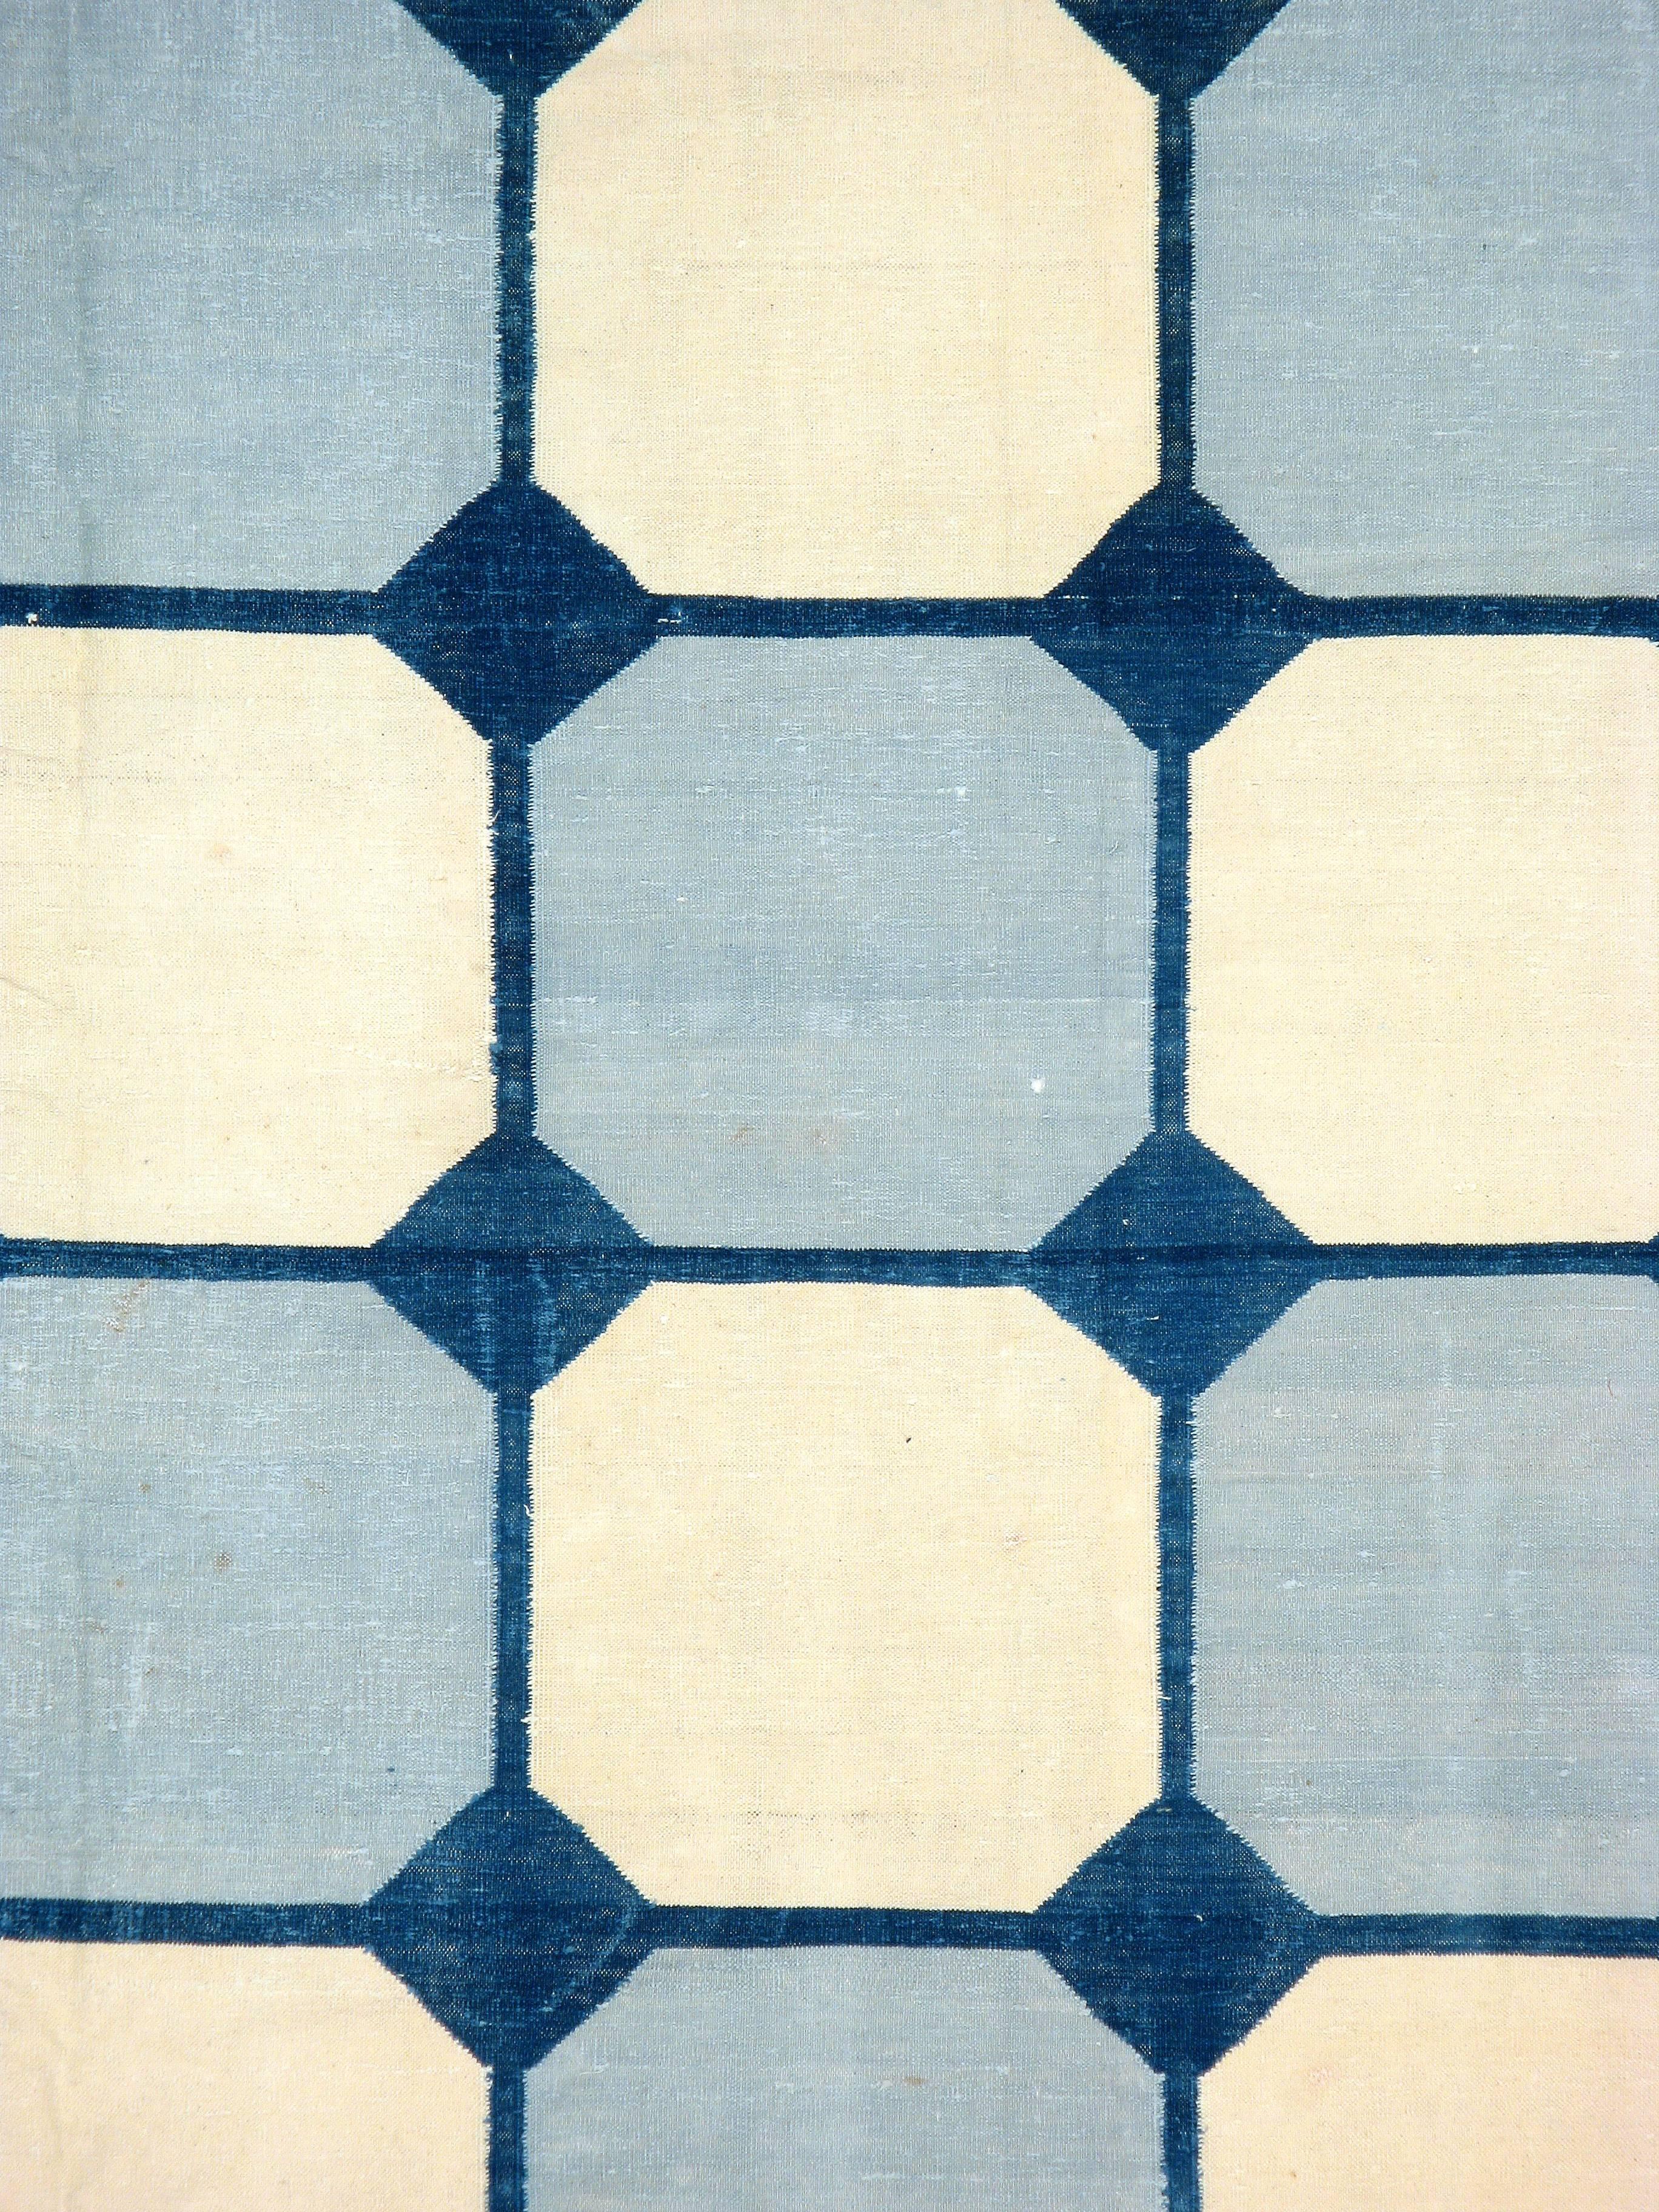 A vintage Indian flat-woven Dhurrie carpet from the second quarter of the 20th century.